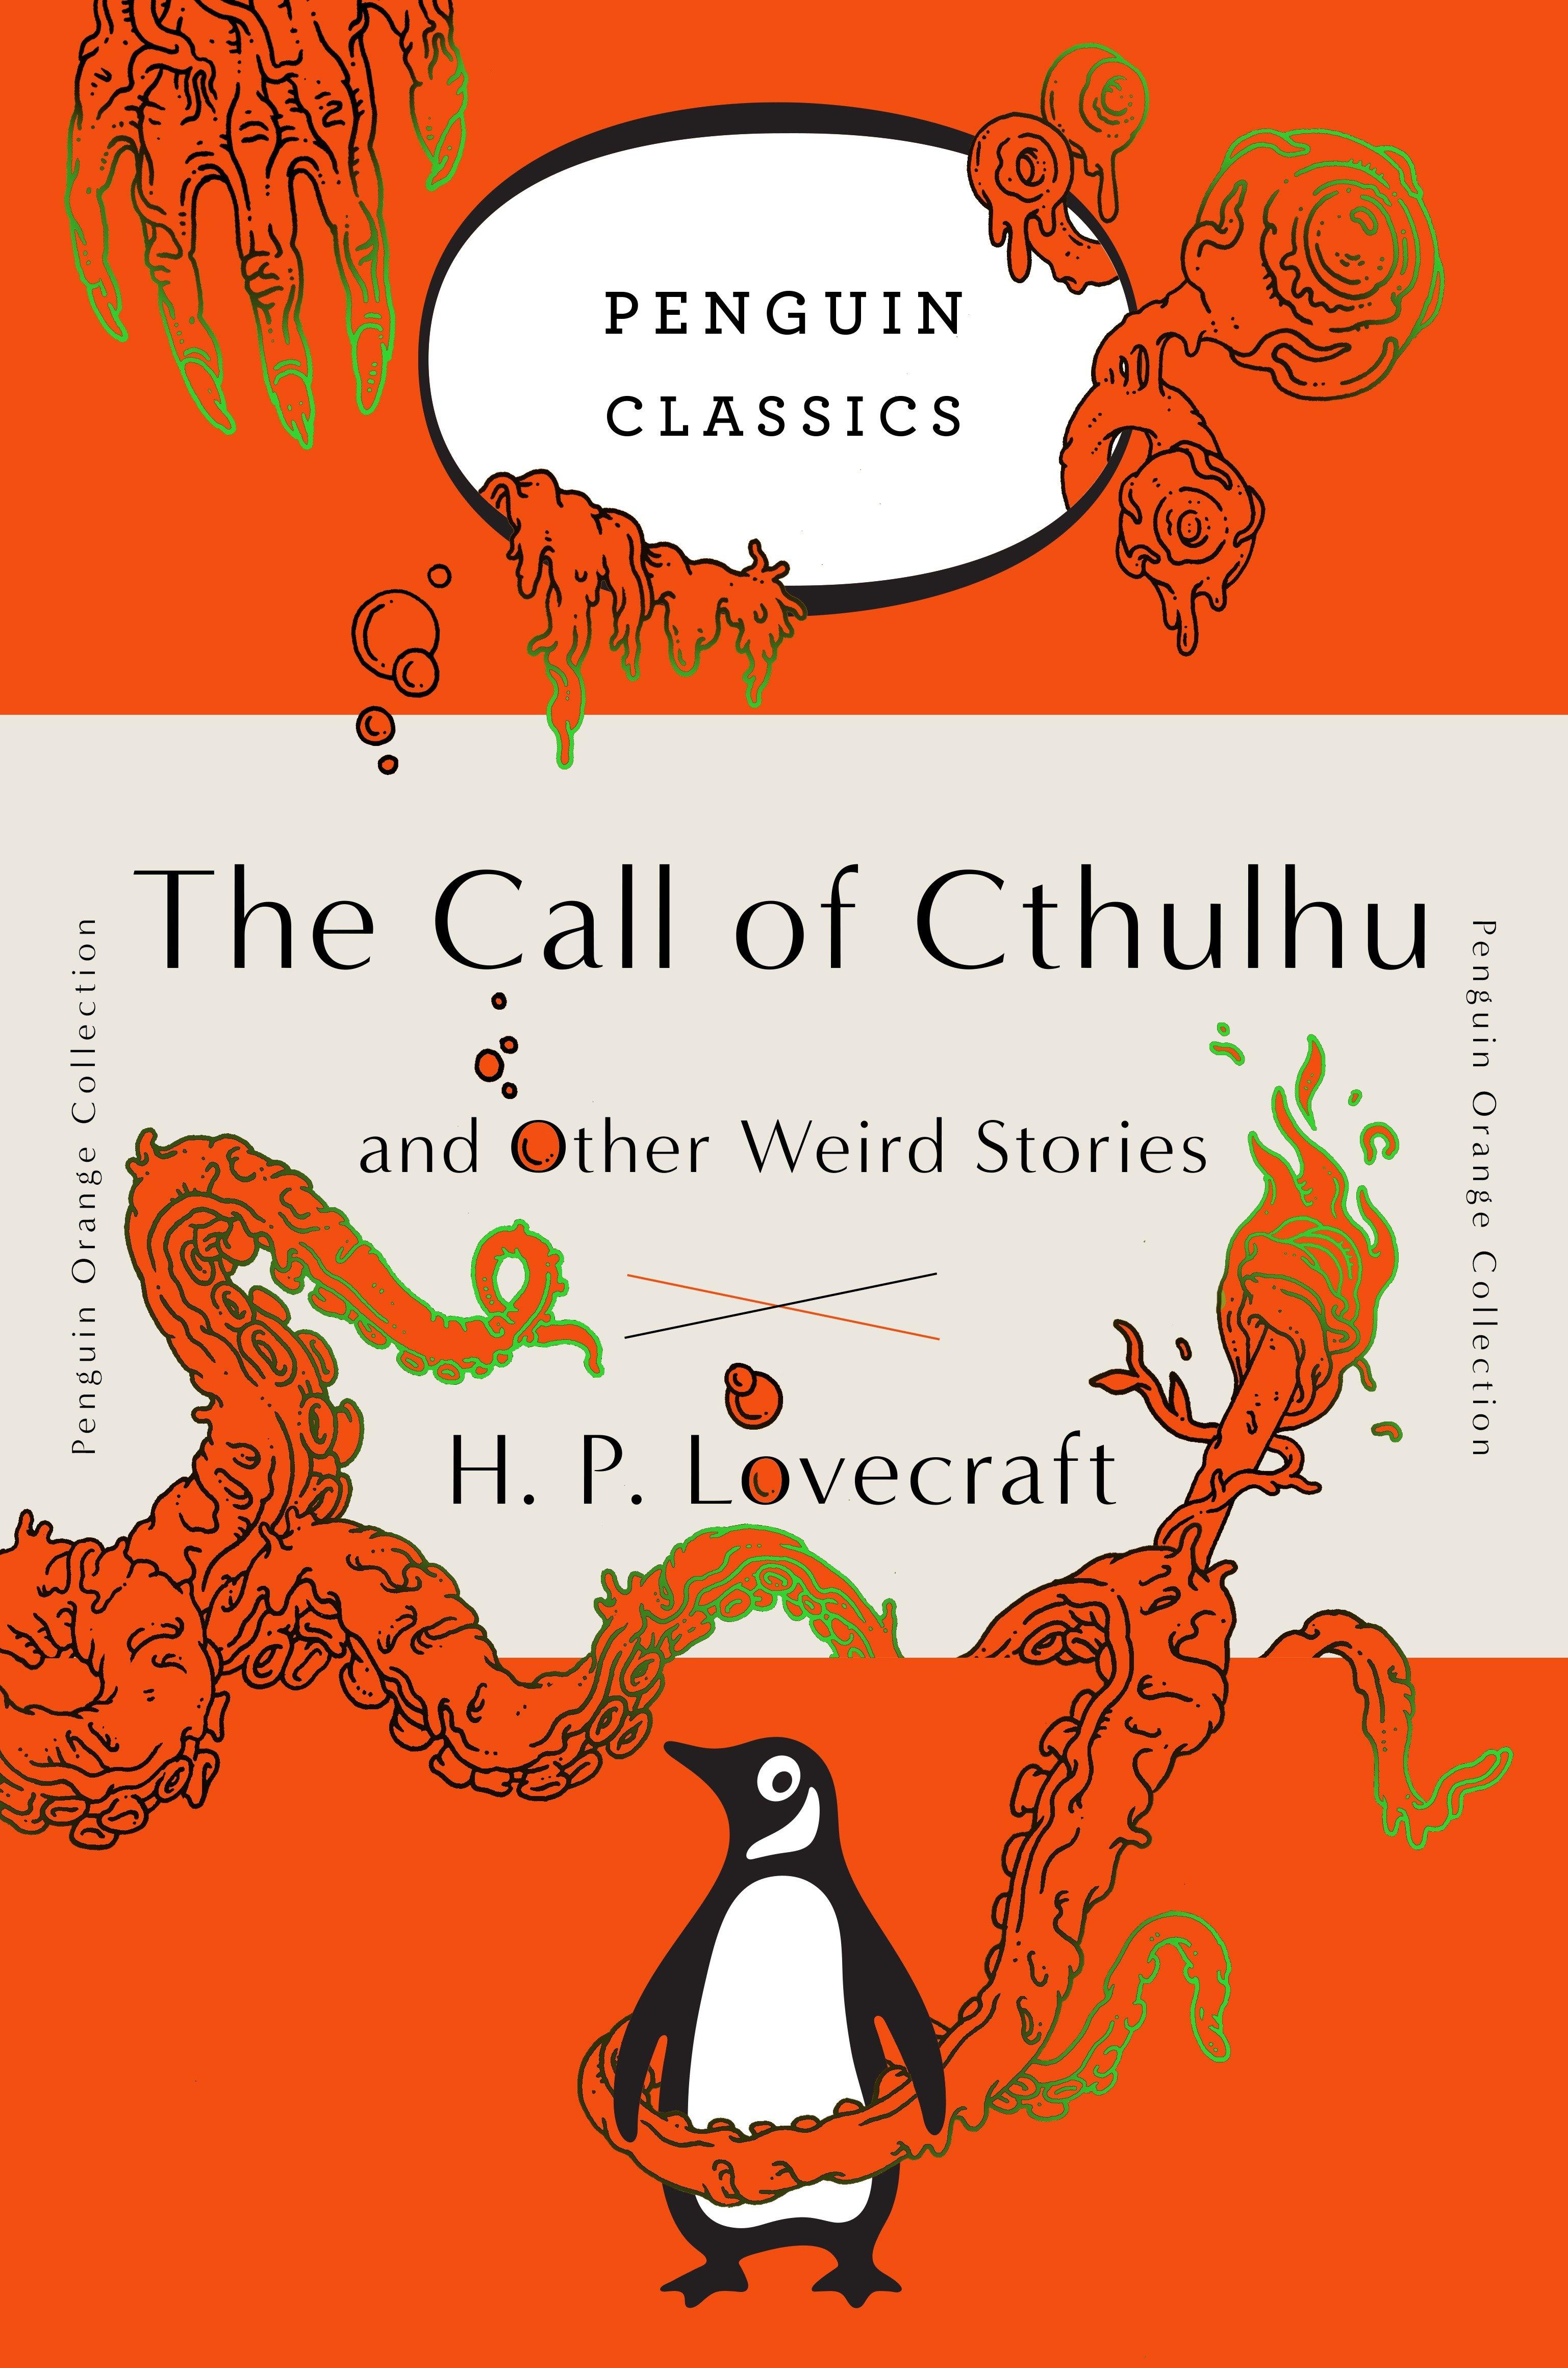 The Call of Cthulhu and Other Weird Stories / (Penguin Orange Collection) / H. P. Lovecraft / Taschenbuch / 360 S. / Englisch / 2016 / Penguin Putnam Inc / EAN 9780143129455 - Lovecraft, H. P.